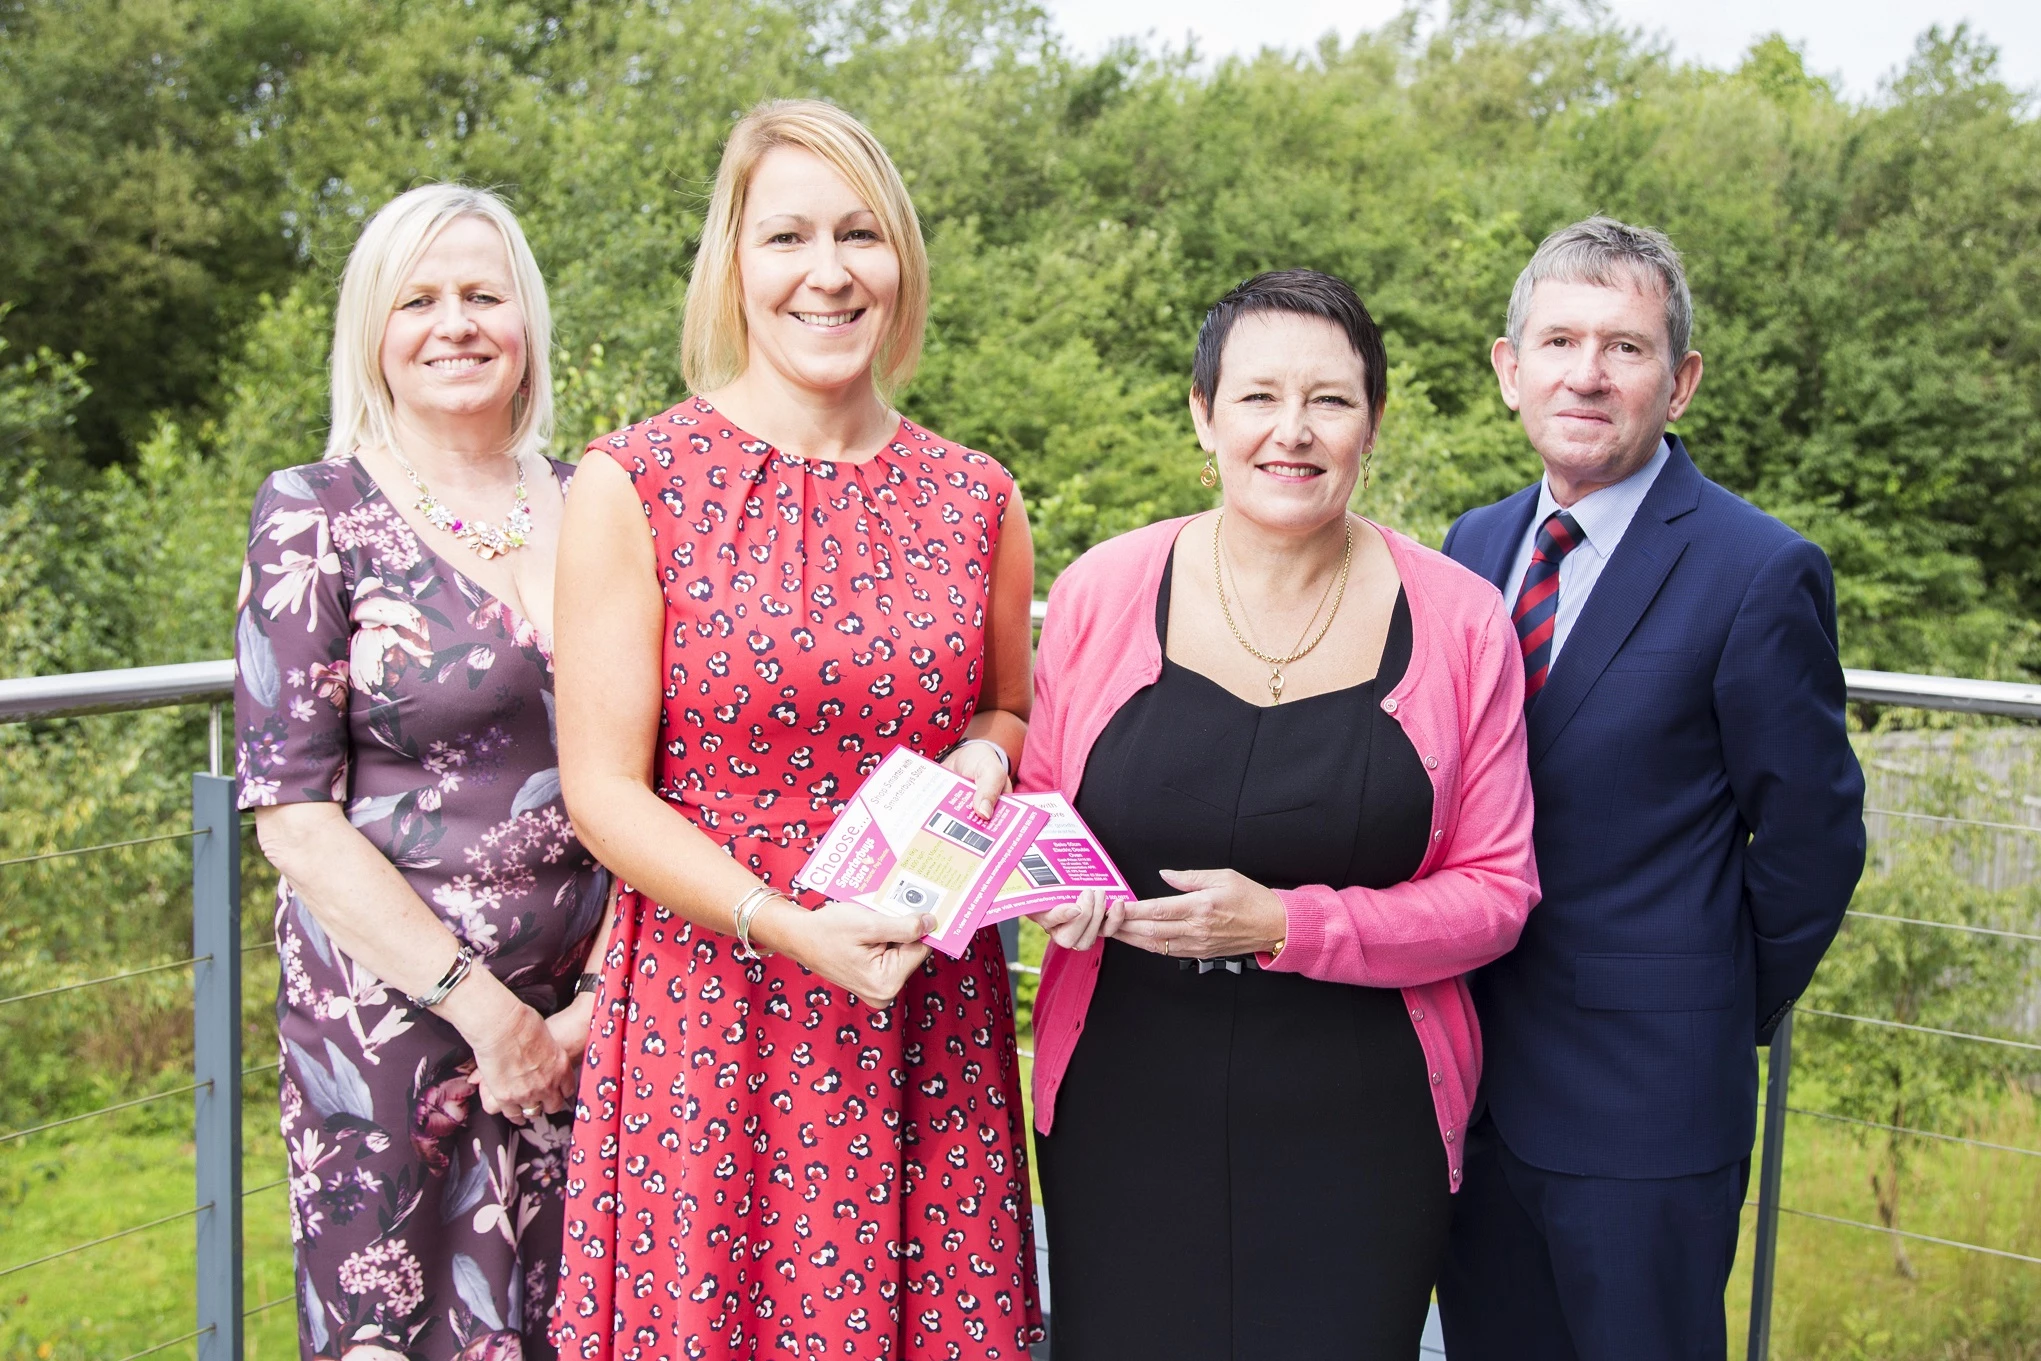 L-R – Smarterbuys Store director Lesley Richardson, chief executive Vicky McCourt, Northstar Ventures investment manager Alison Collins and Smarterbuys Store company secretary and director Keith Tallintire